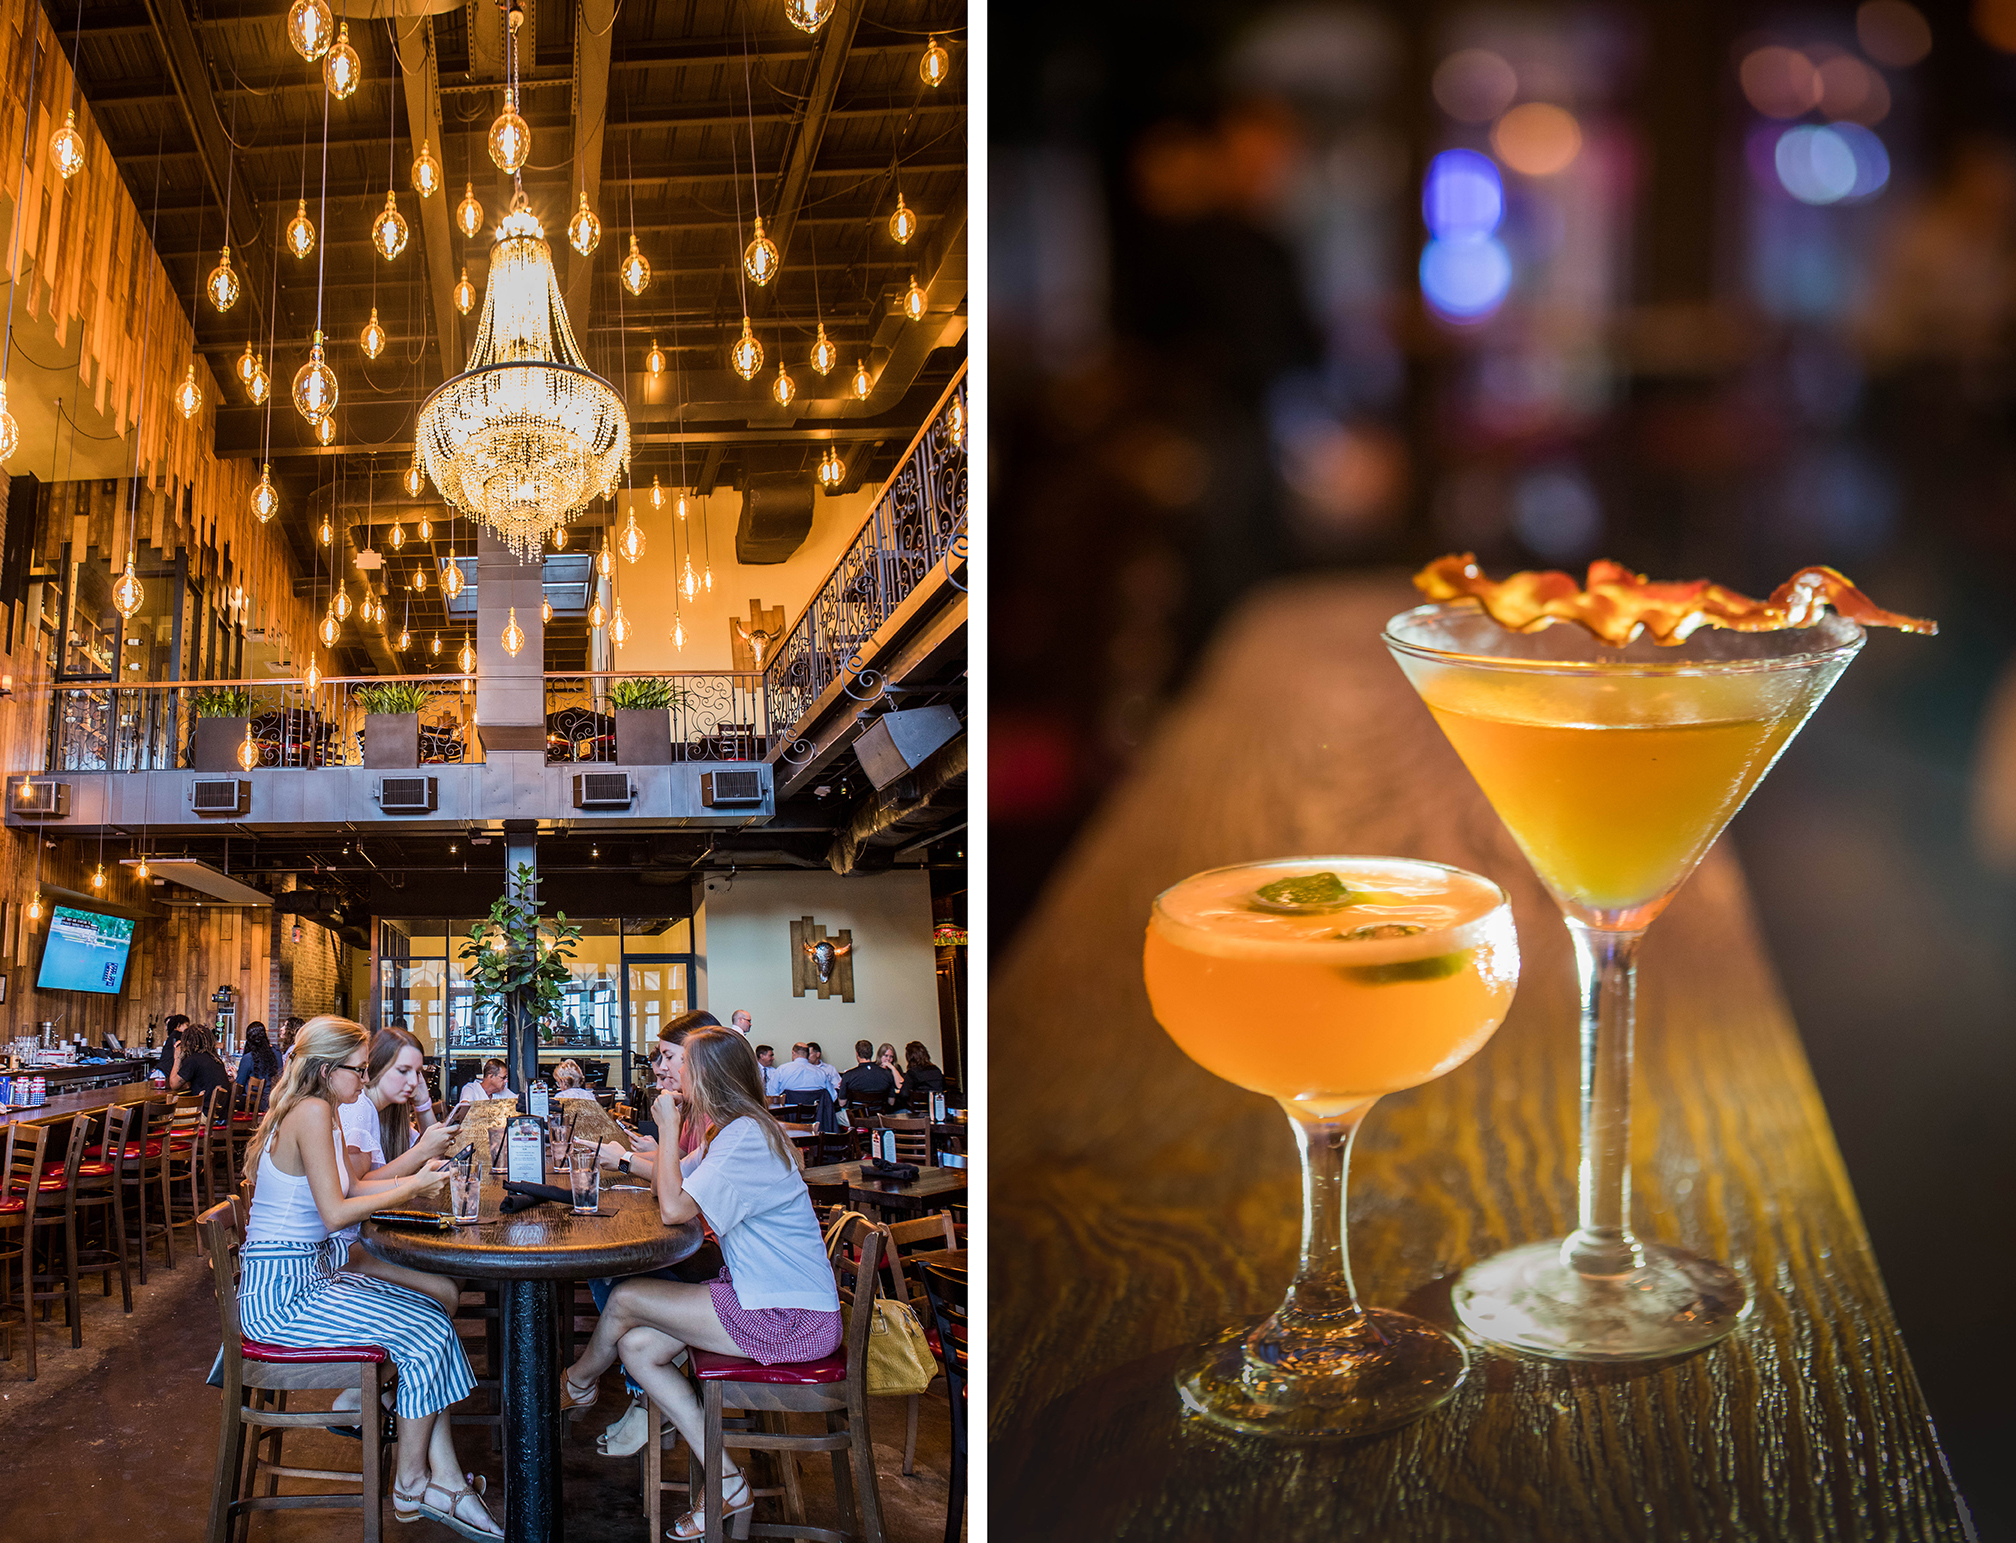 Houston-based Hearsay opened a gastropub in Galveston, Texas, in 2018. It's located in the Strand Historic District, only a couple blocks from The Tremont House.